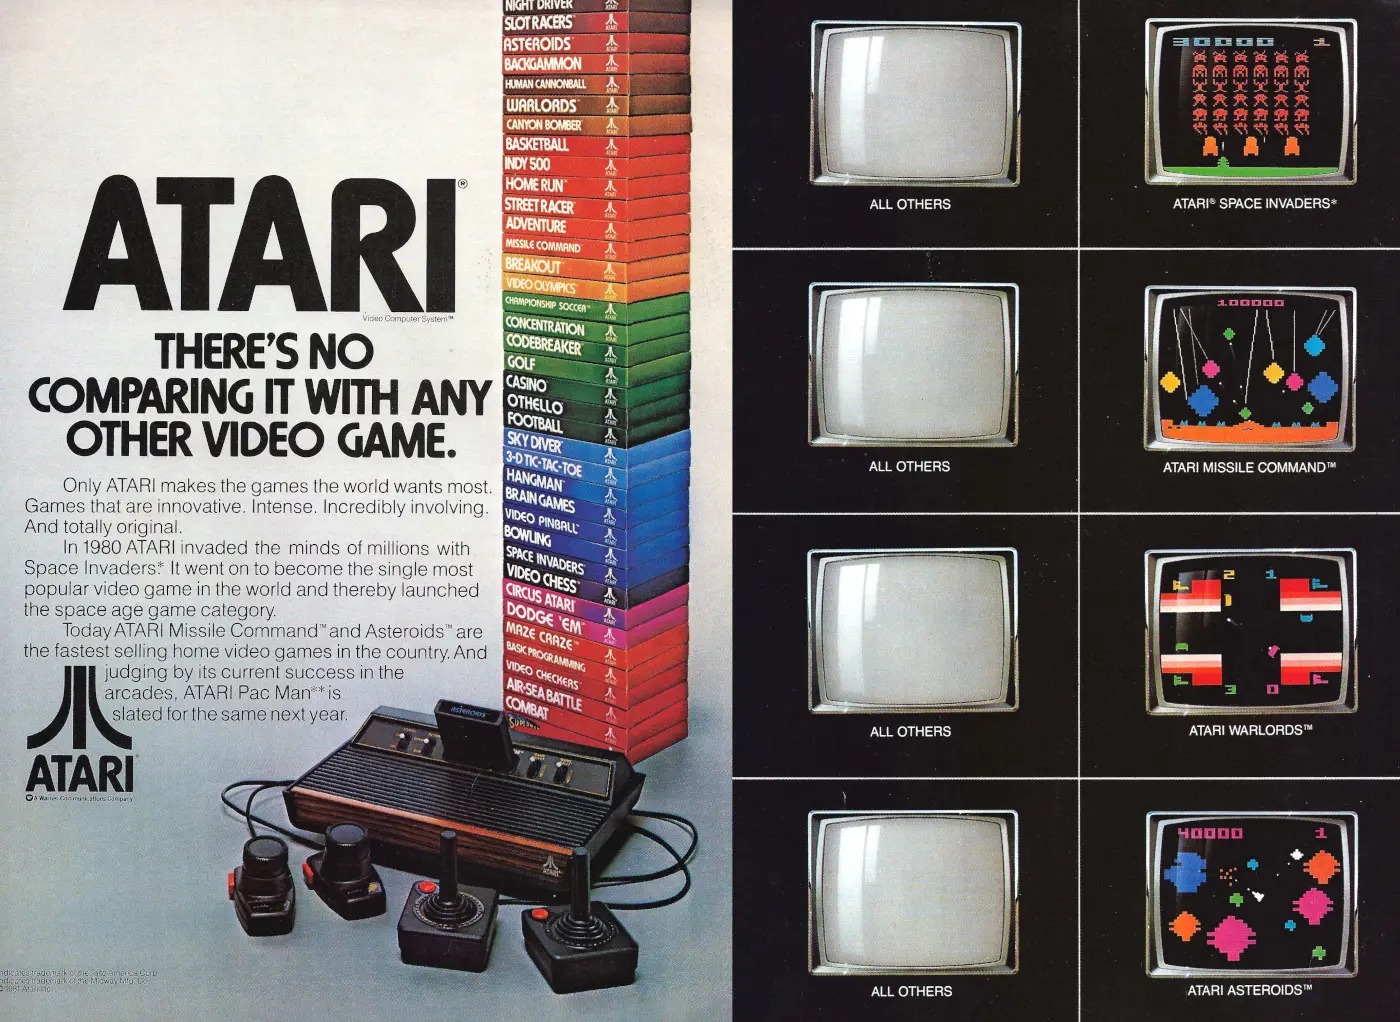 Atari Advert: <b>Atari: There's No Comparing It With Any Other Video Game</b>, from Omni, 10th February 1981